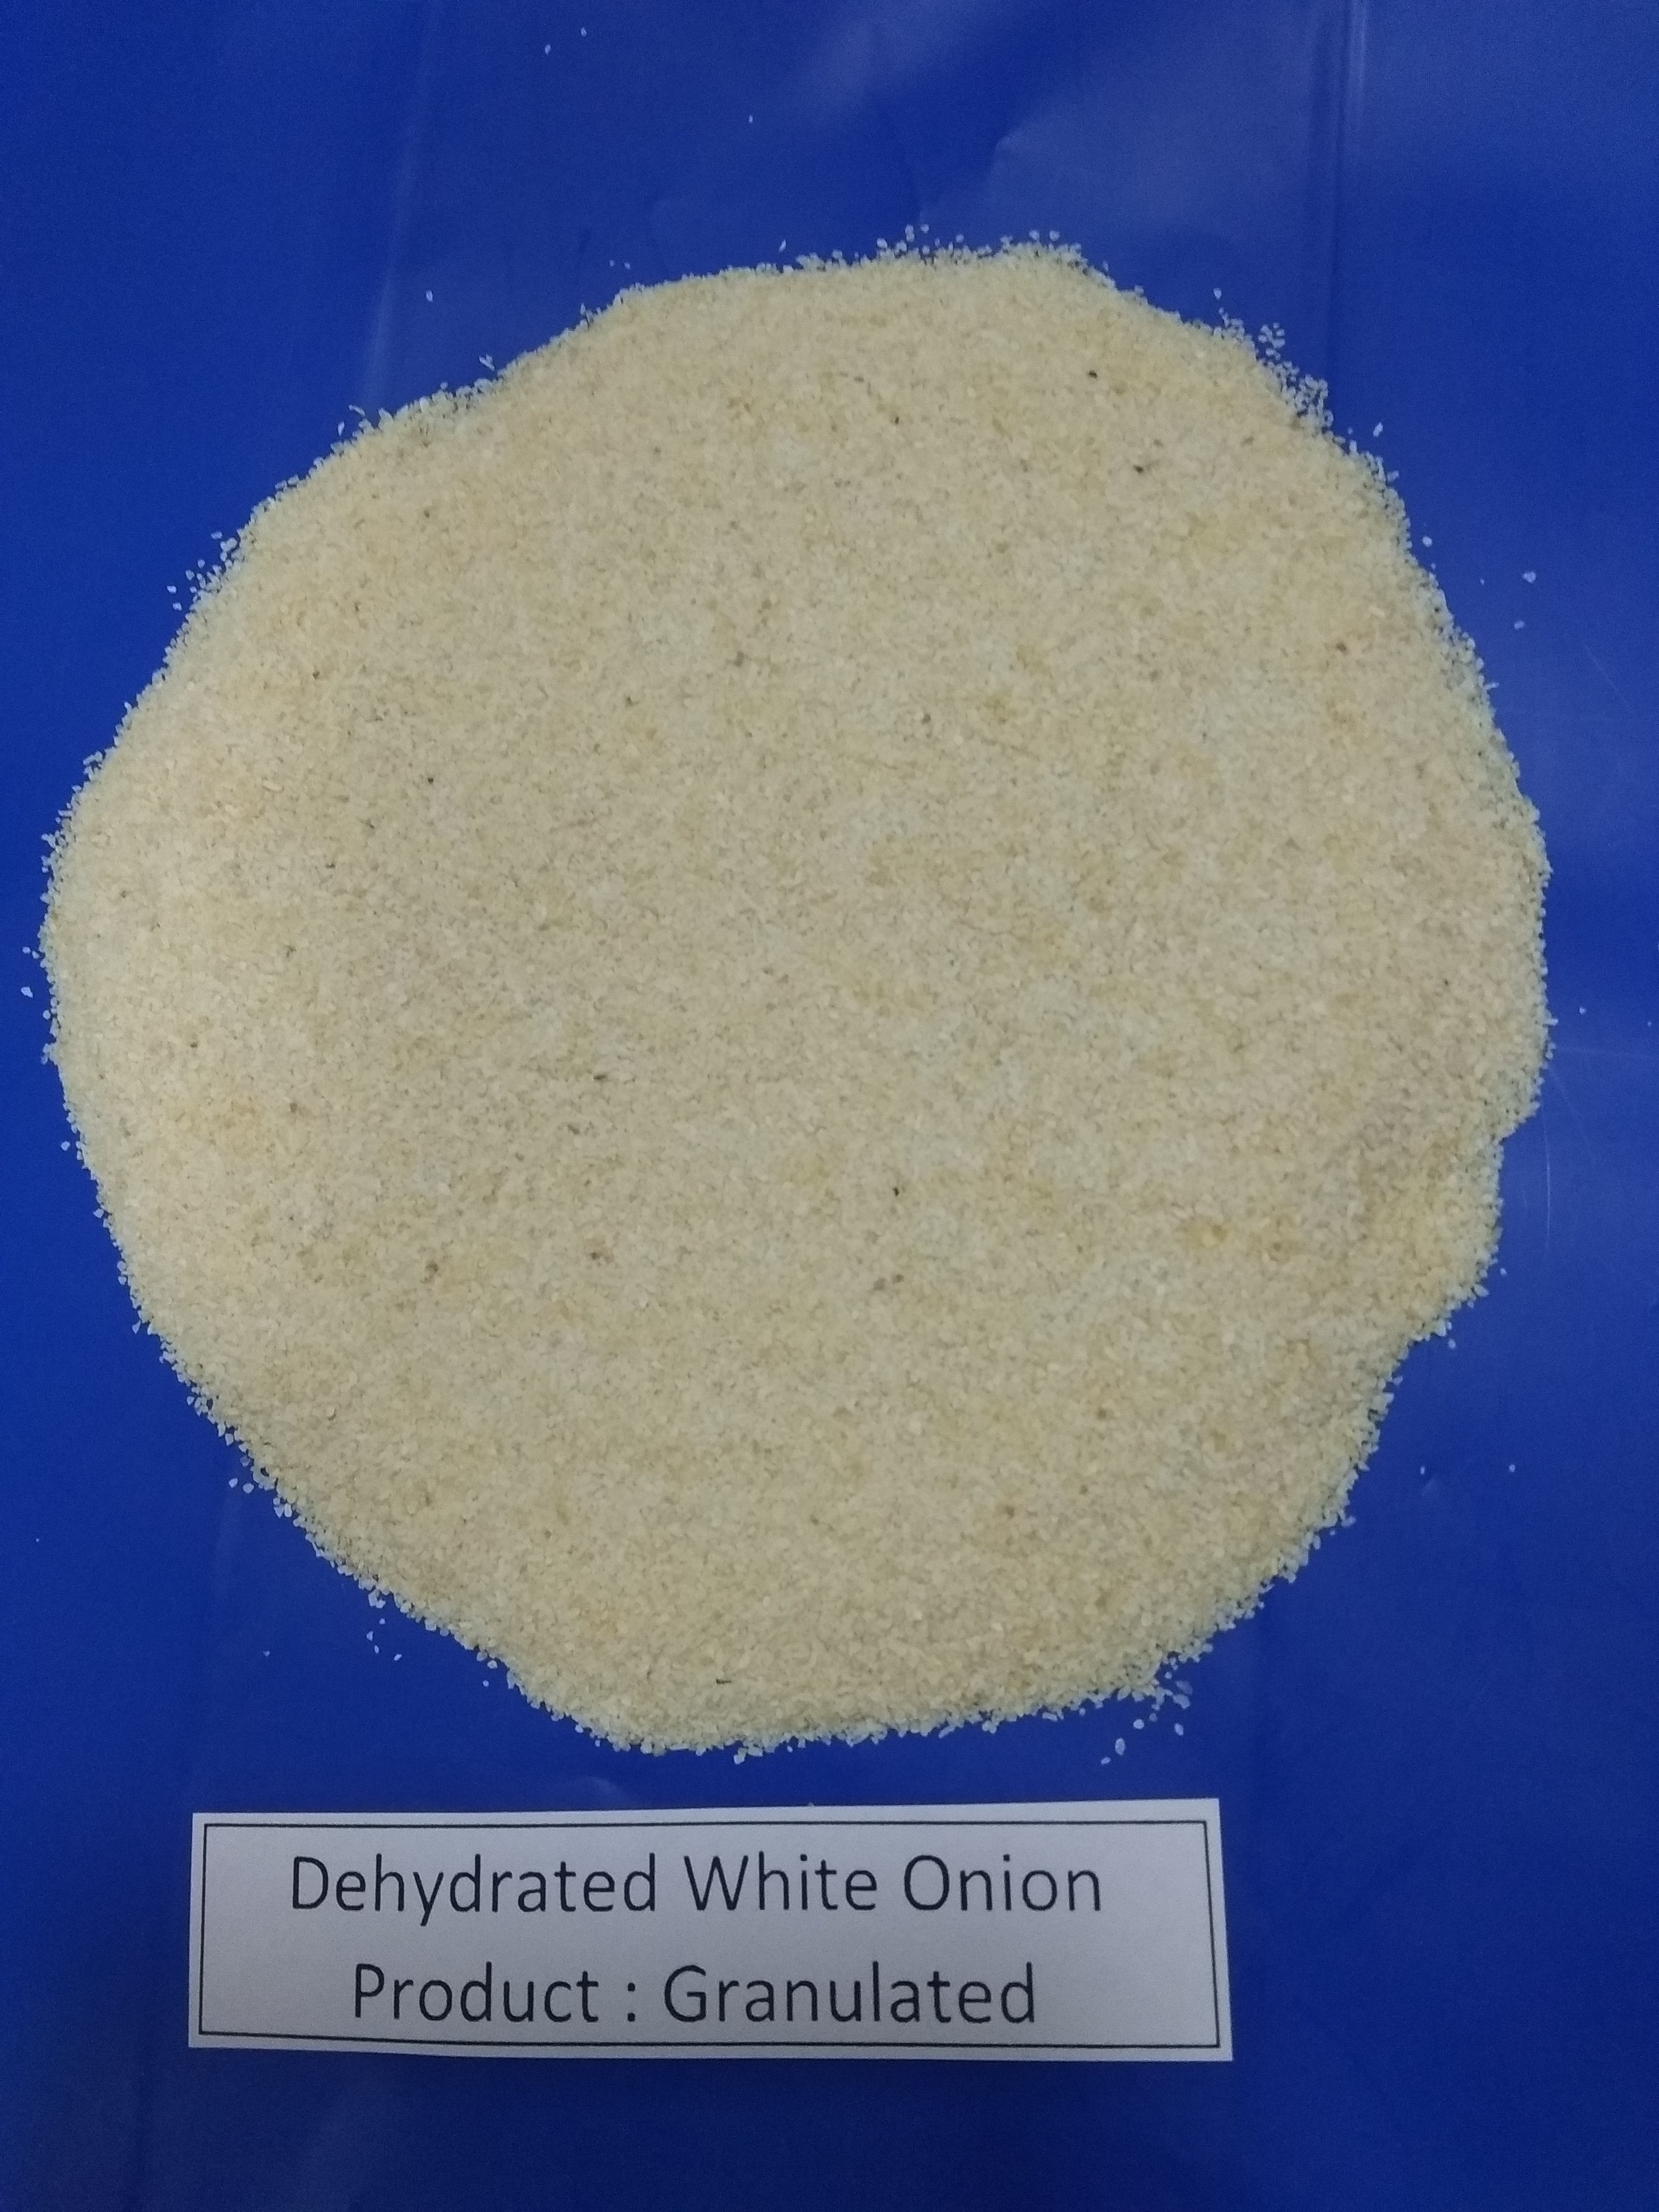 Dehydrated White Oinion Granulated